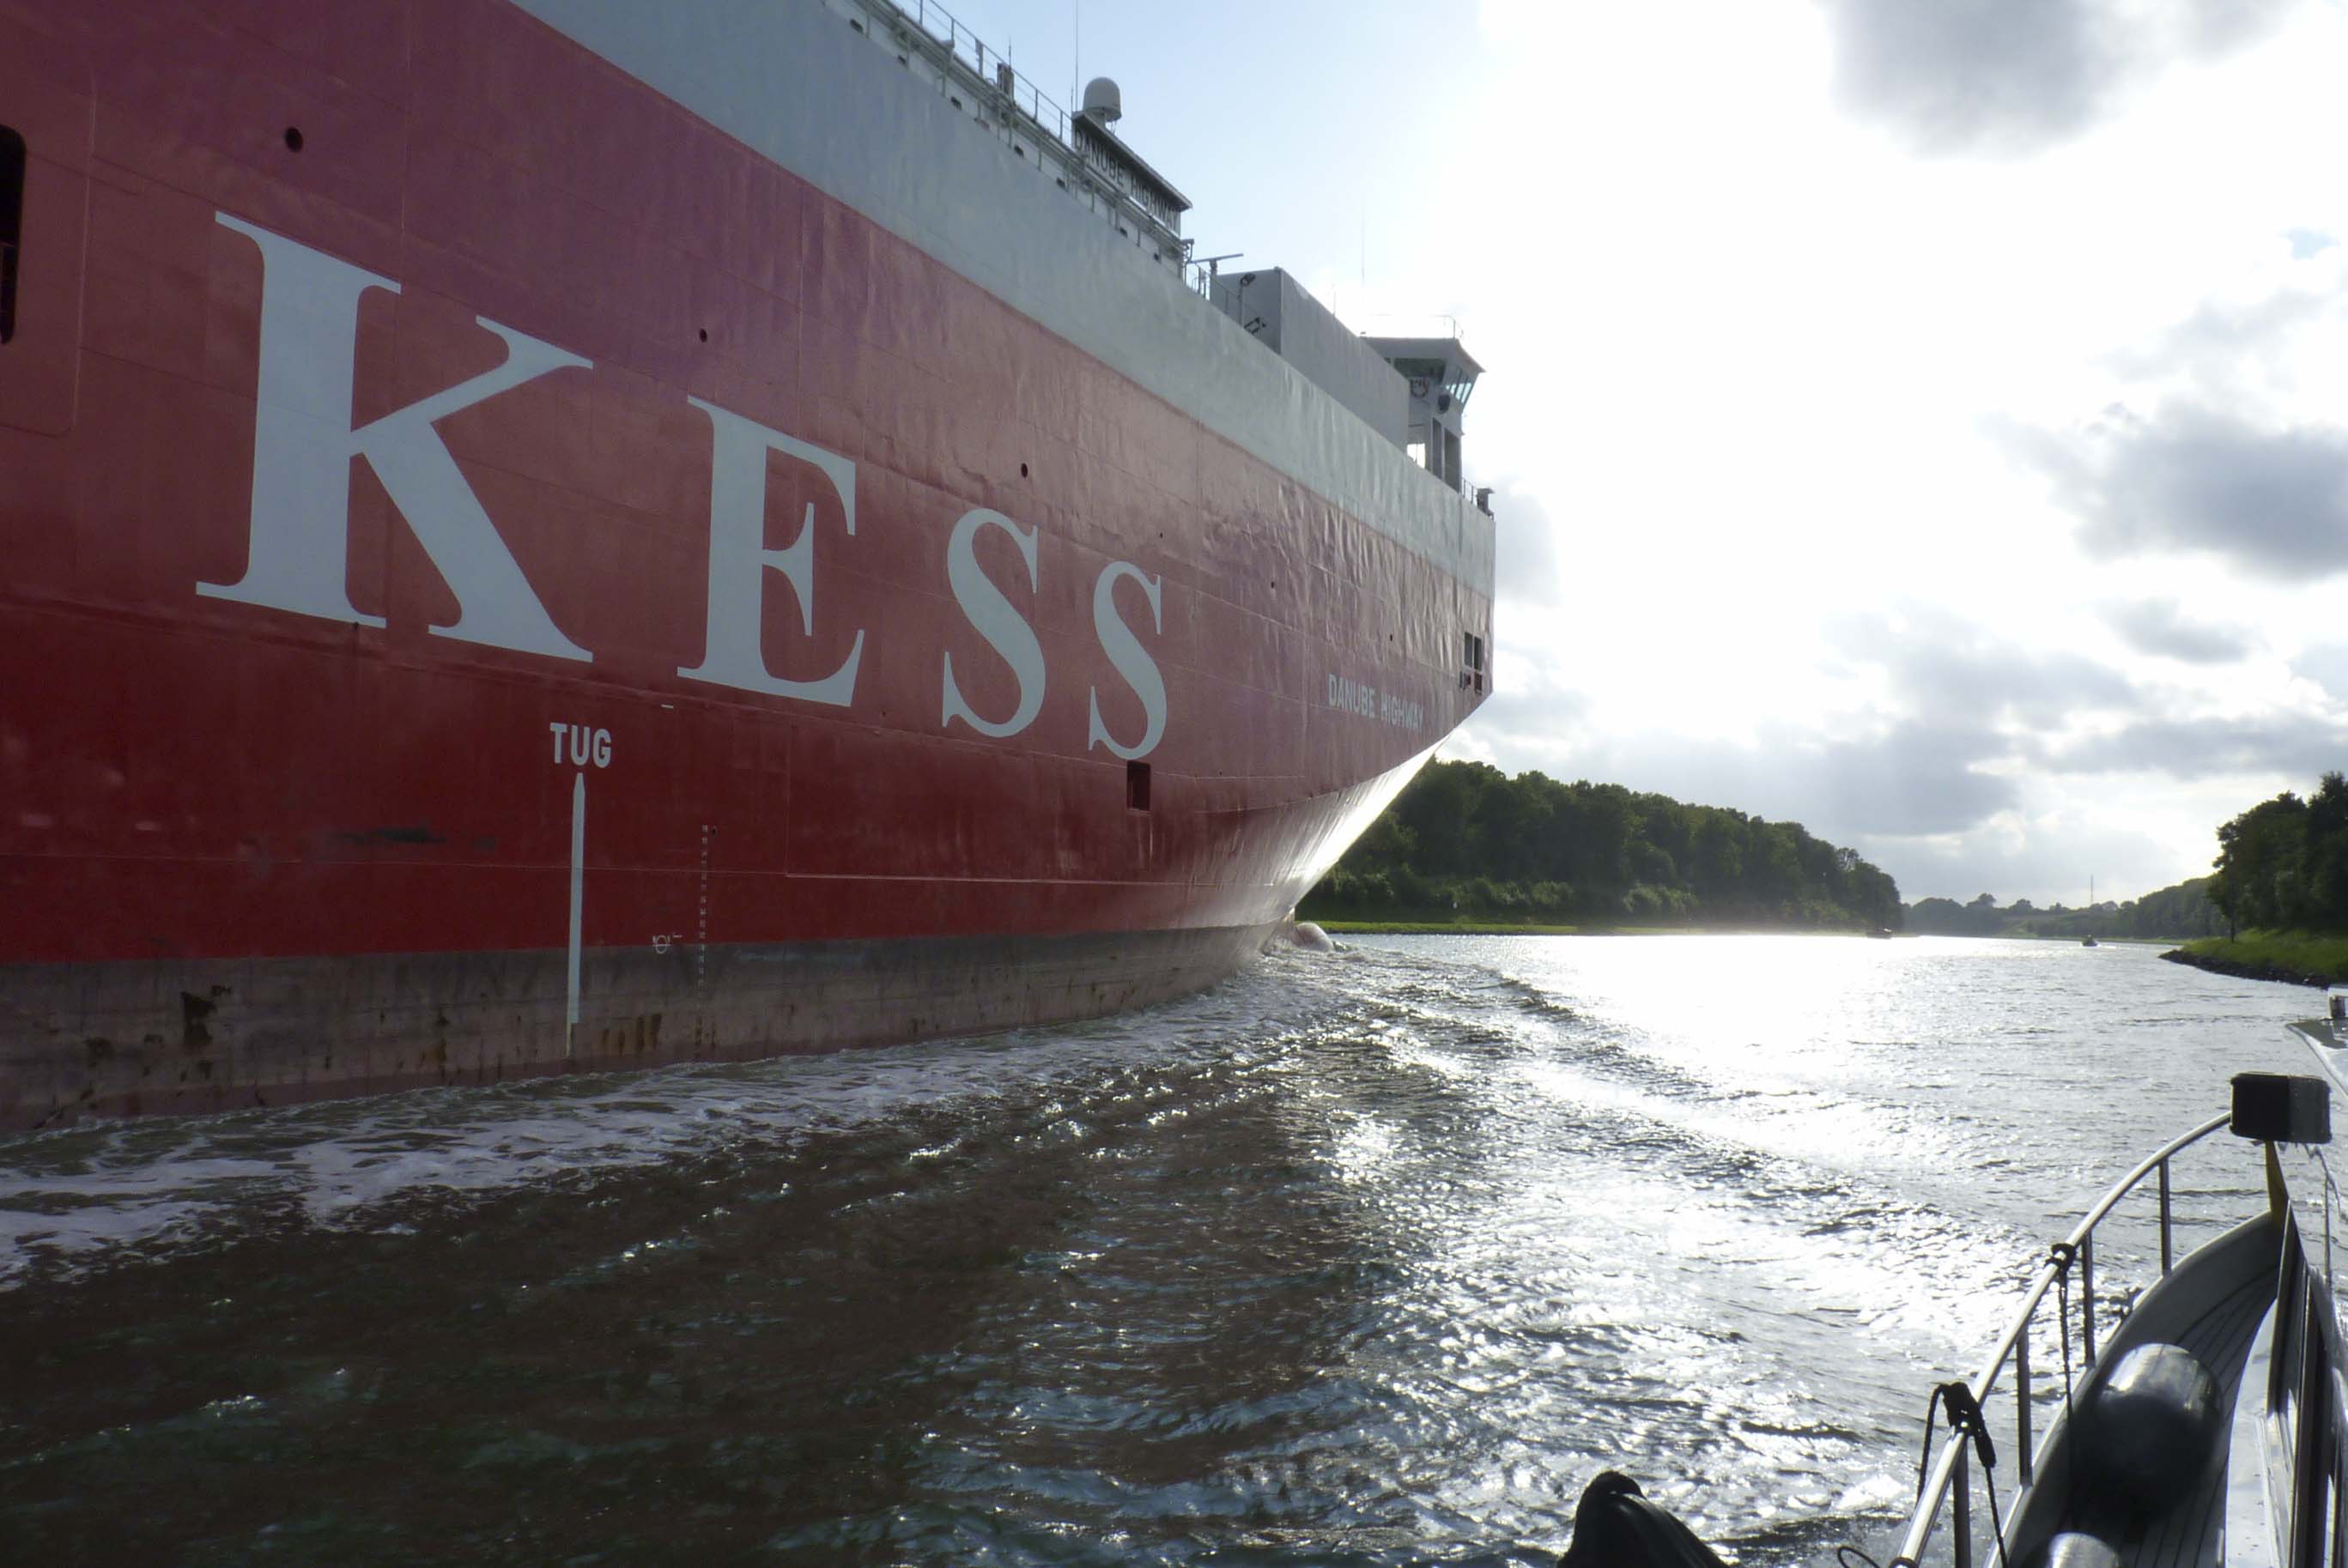 The Bay of Kiel is one of the busiest shipping routes in the world.